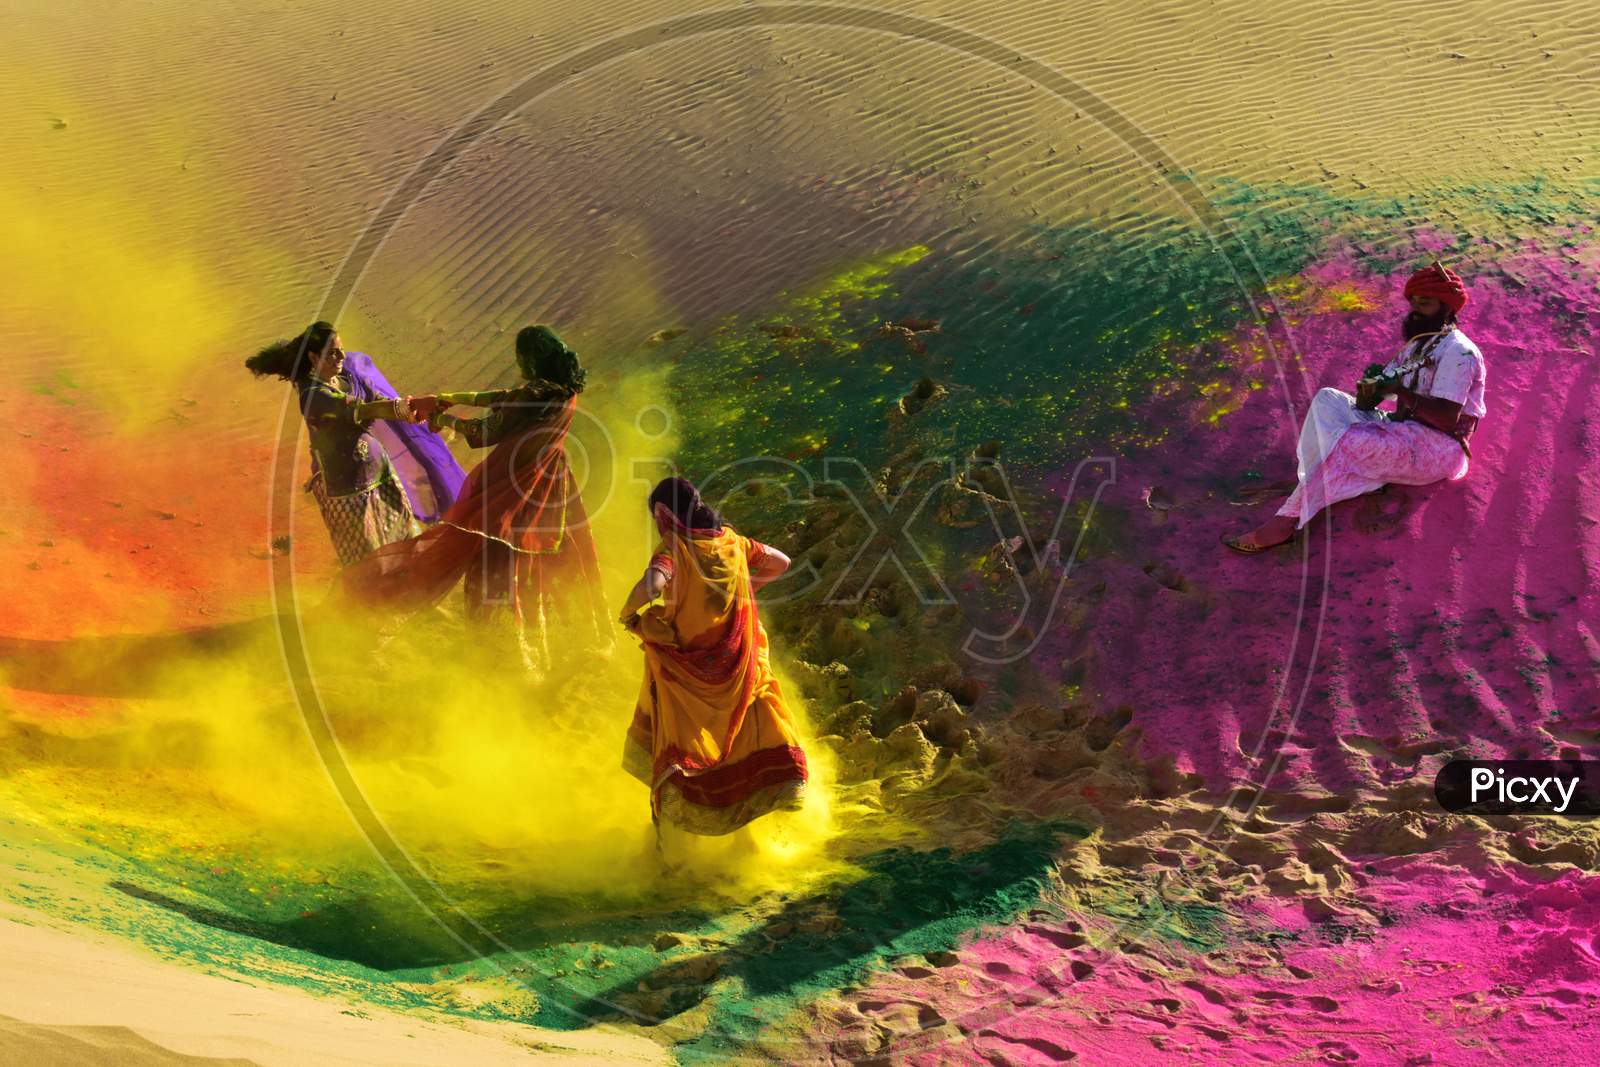 Three girls are enjoying Holi with various colours and a man playing a musical instrument